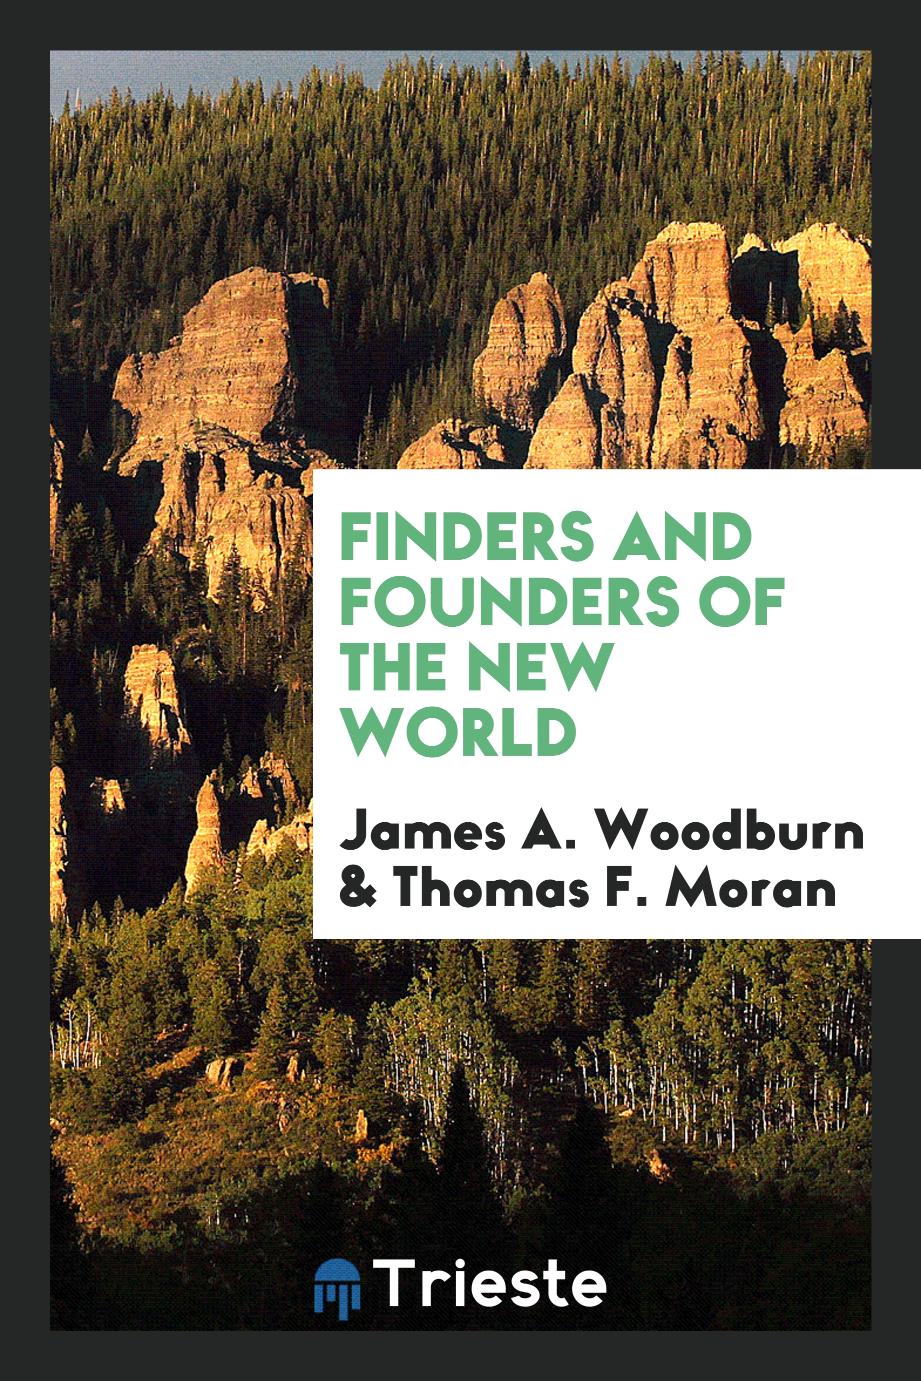 Finders and founders of the New world